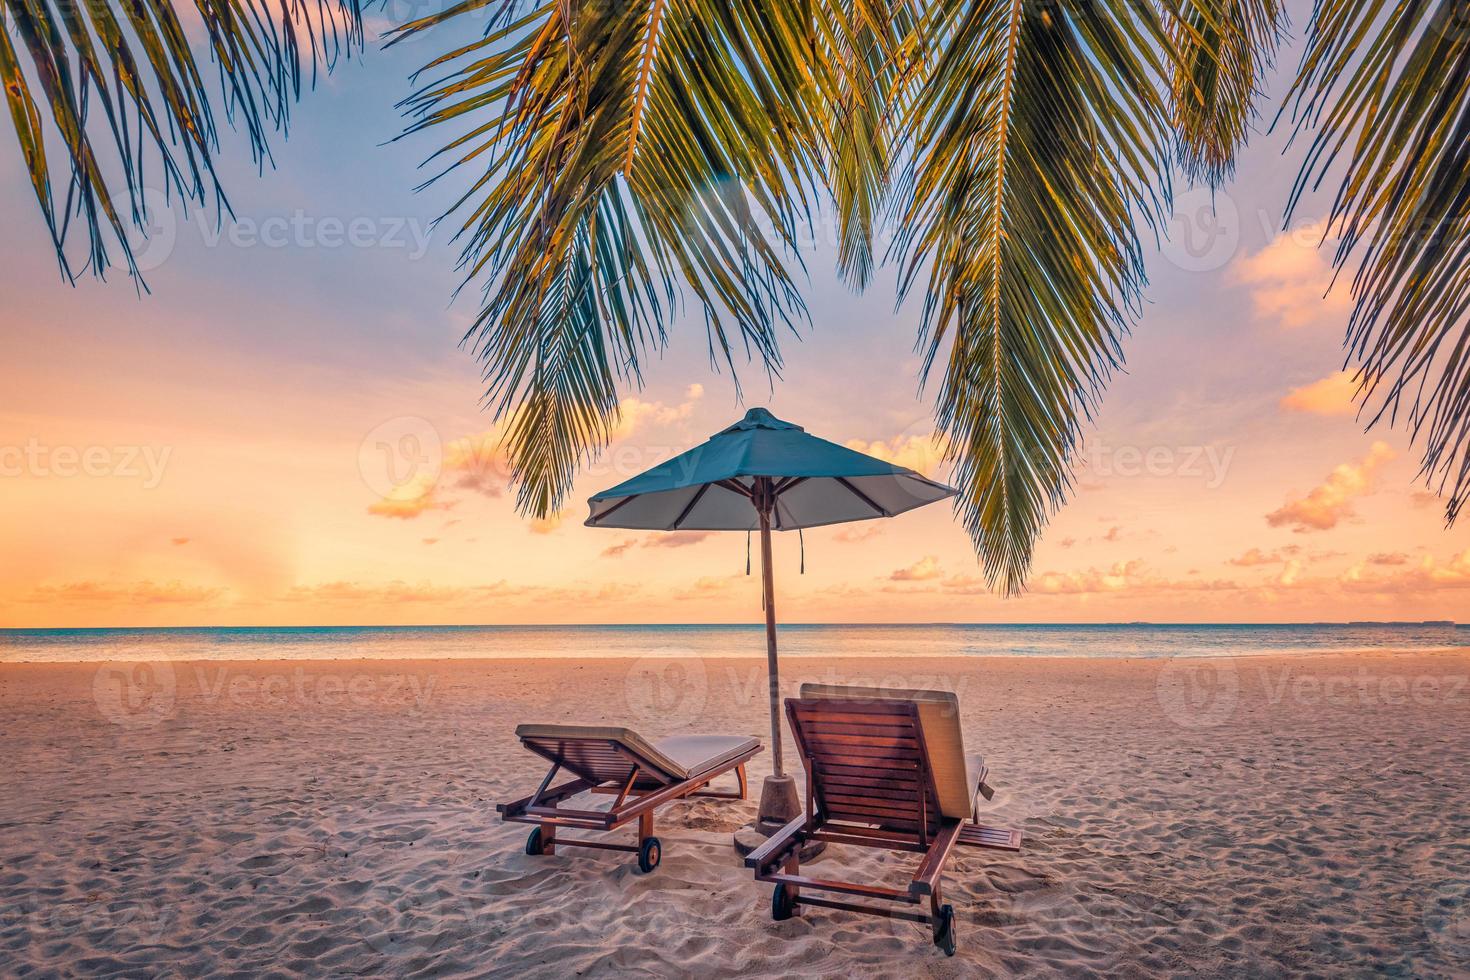 Beautiful tropical sunset scenery, couple chairs, loungers, umbrella under palm tree. Closeup sea sand sky horizon, colorful twilight clouds, relax tranquil vacation landscape. Summer holiday, idyllic photo